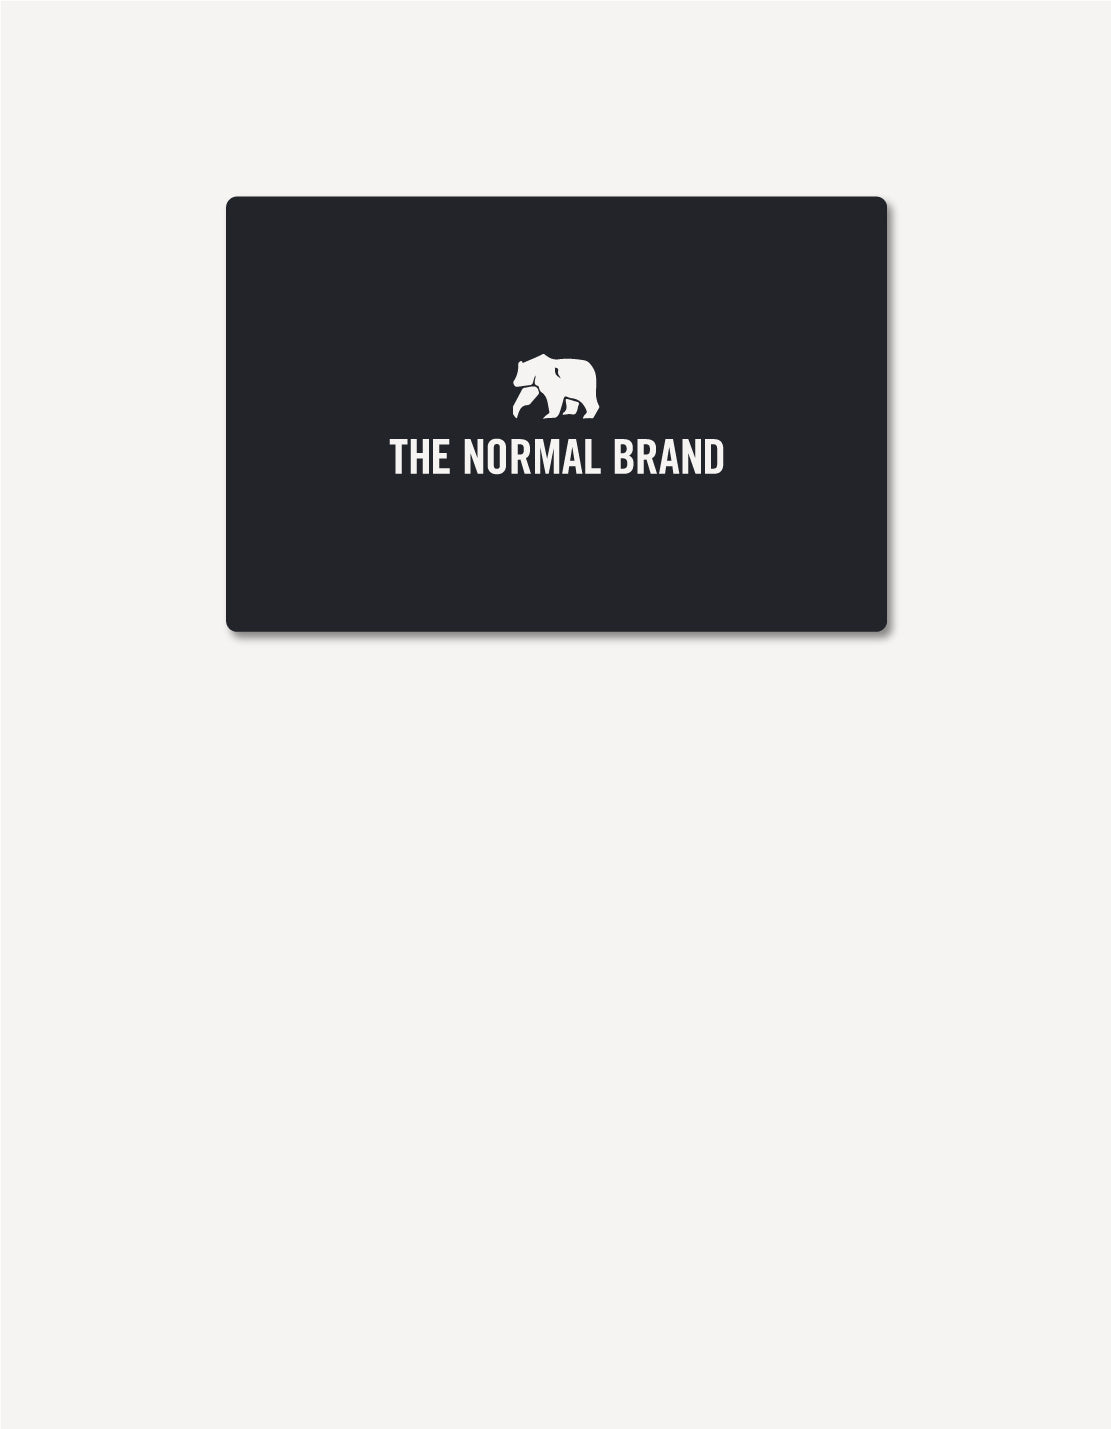 Normal Brand Gift Card